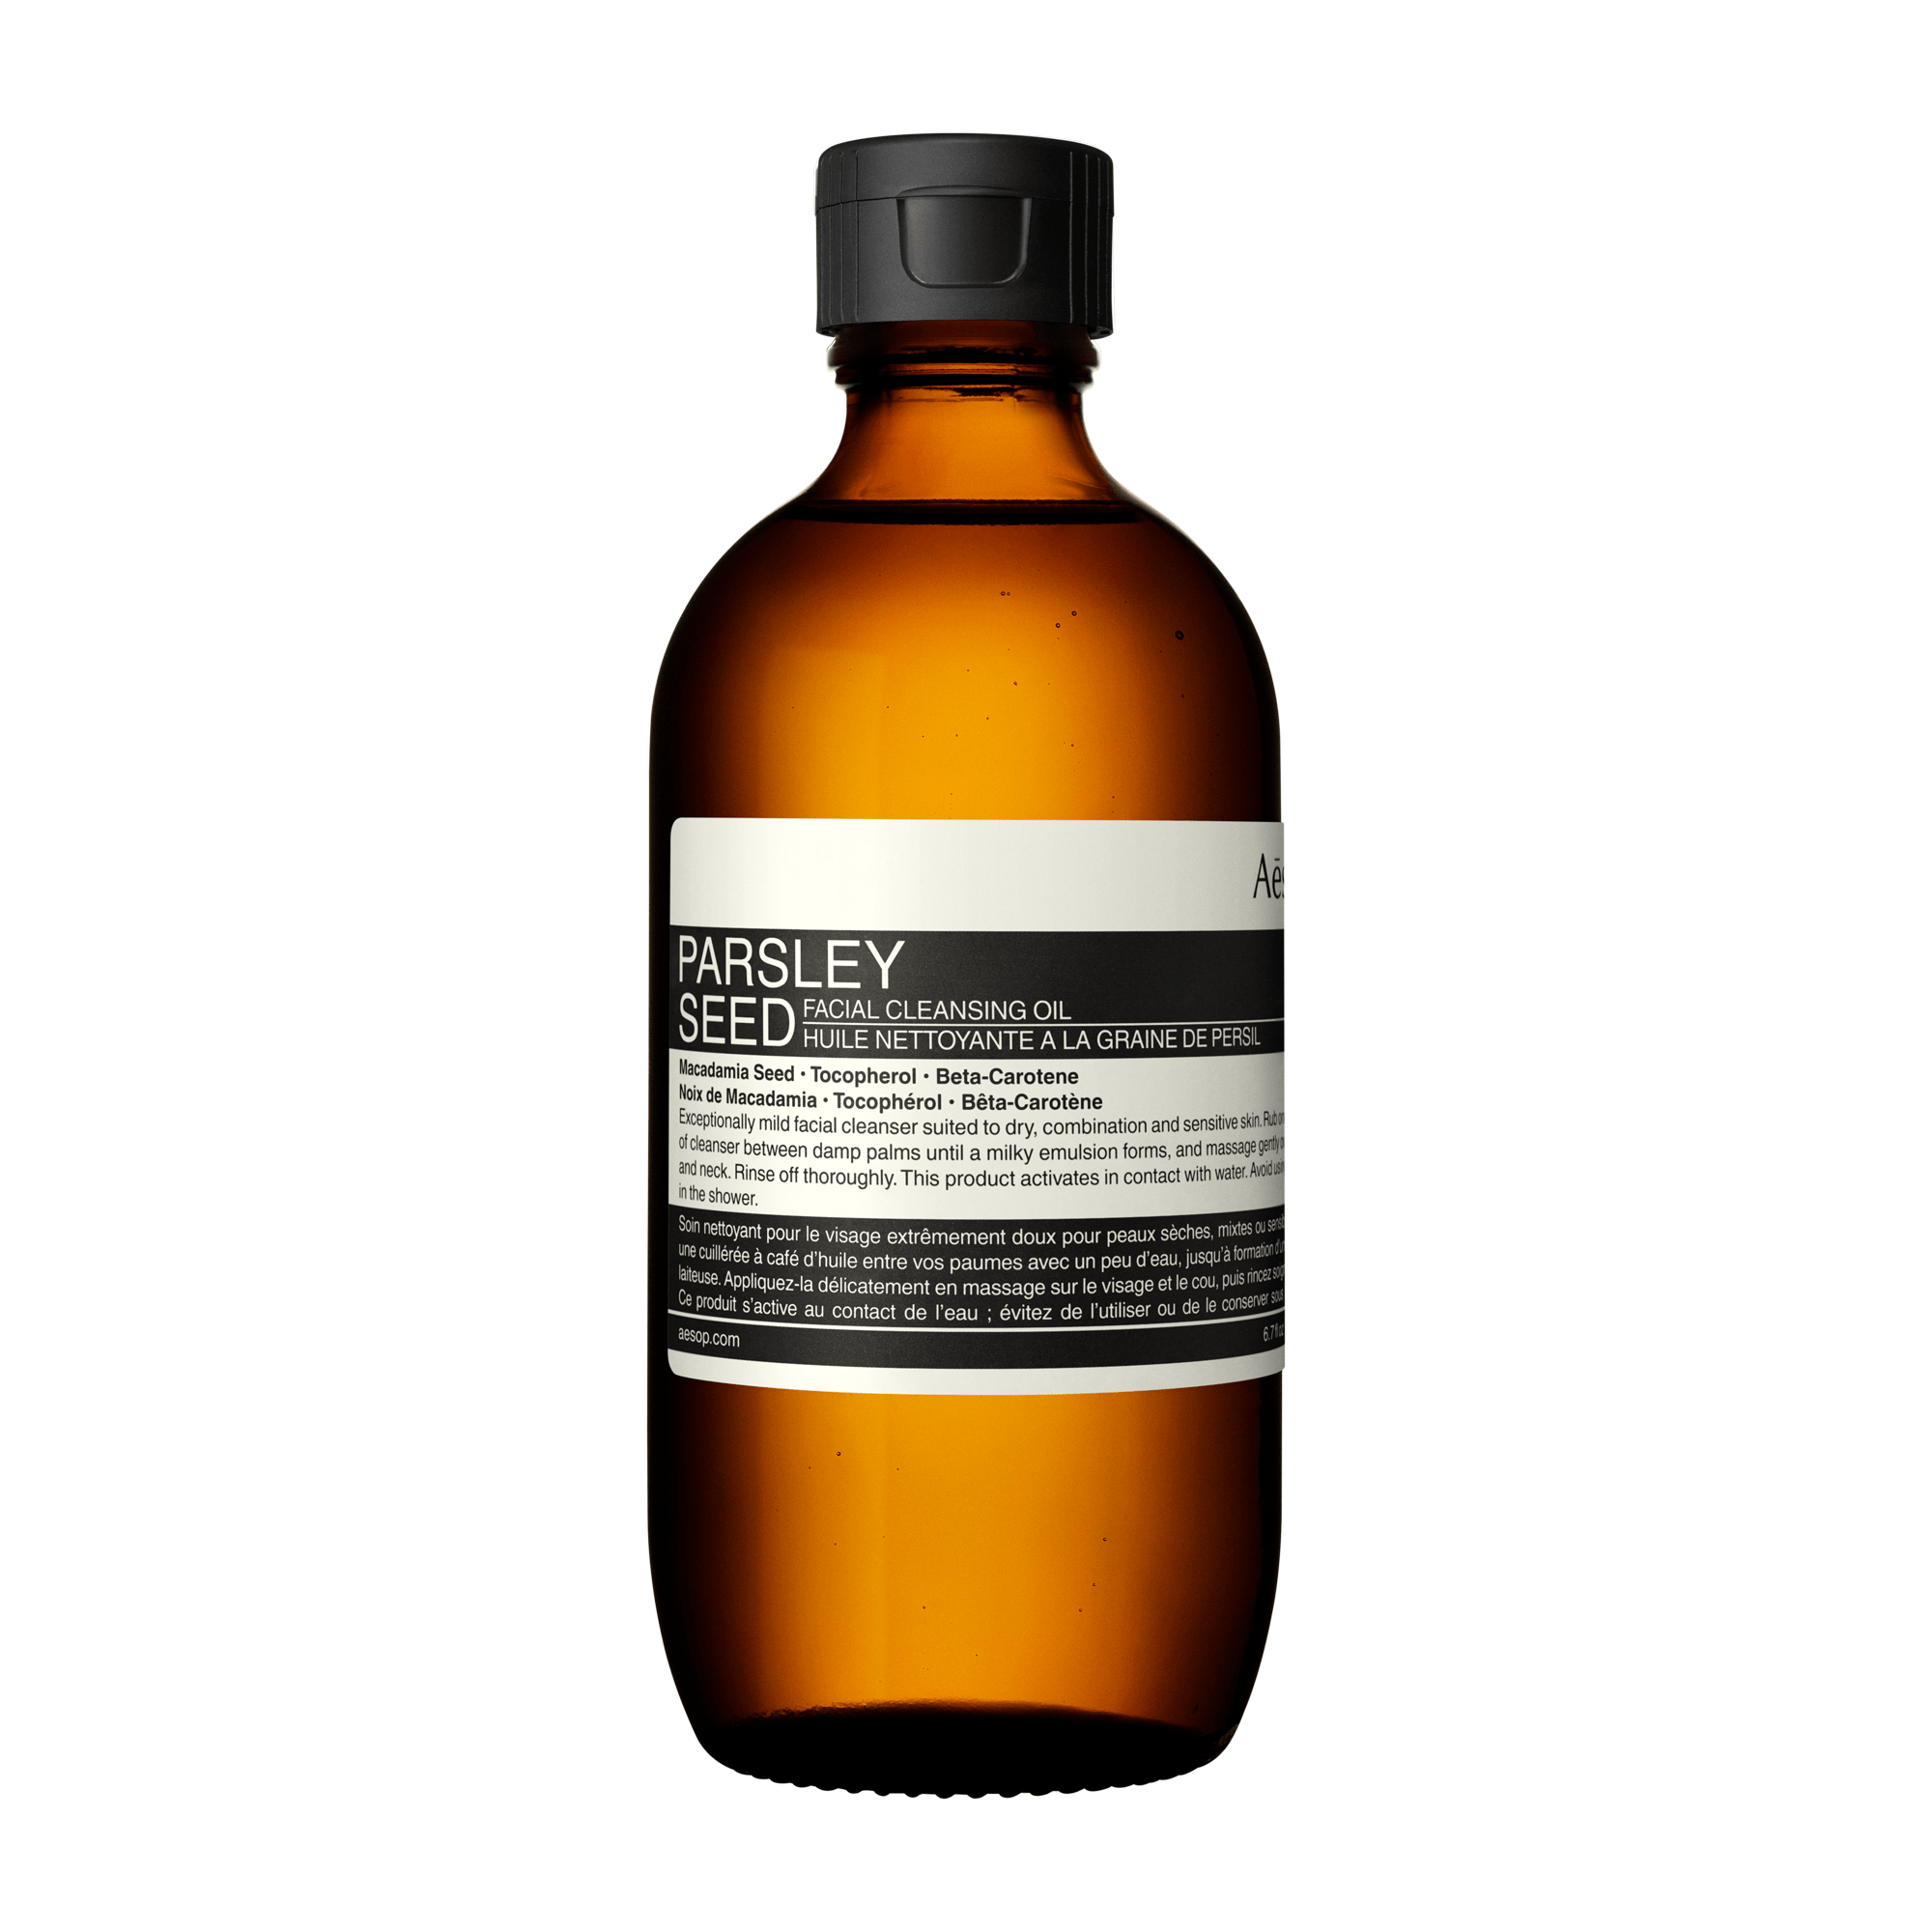 Parsley Seed Facial Cleansing Oil Aesop Facial Cleanser